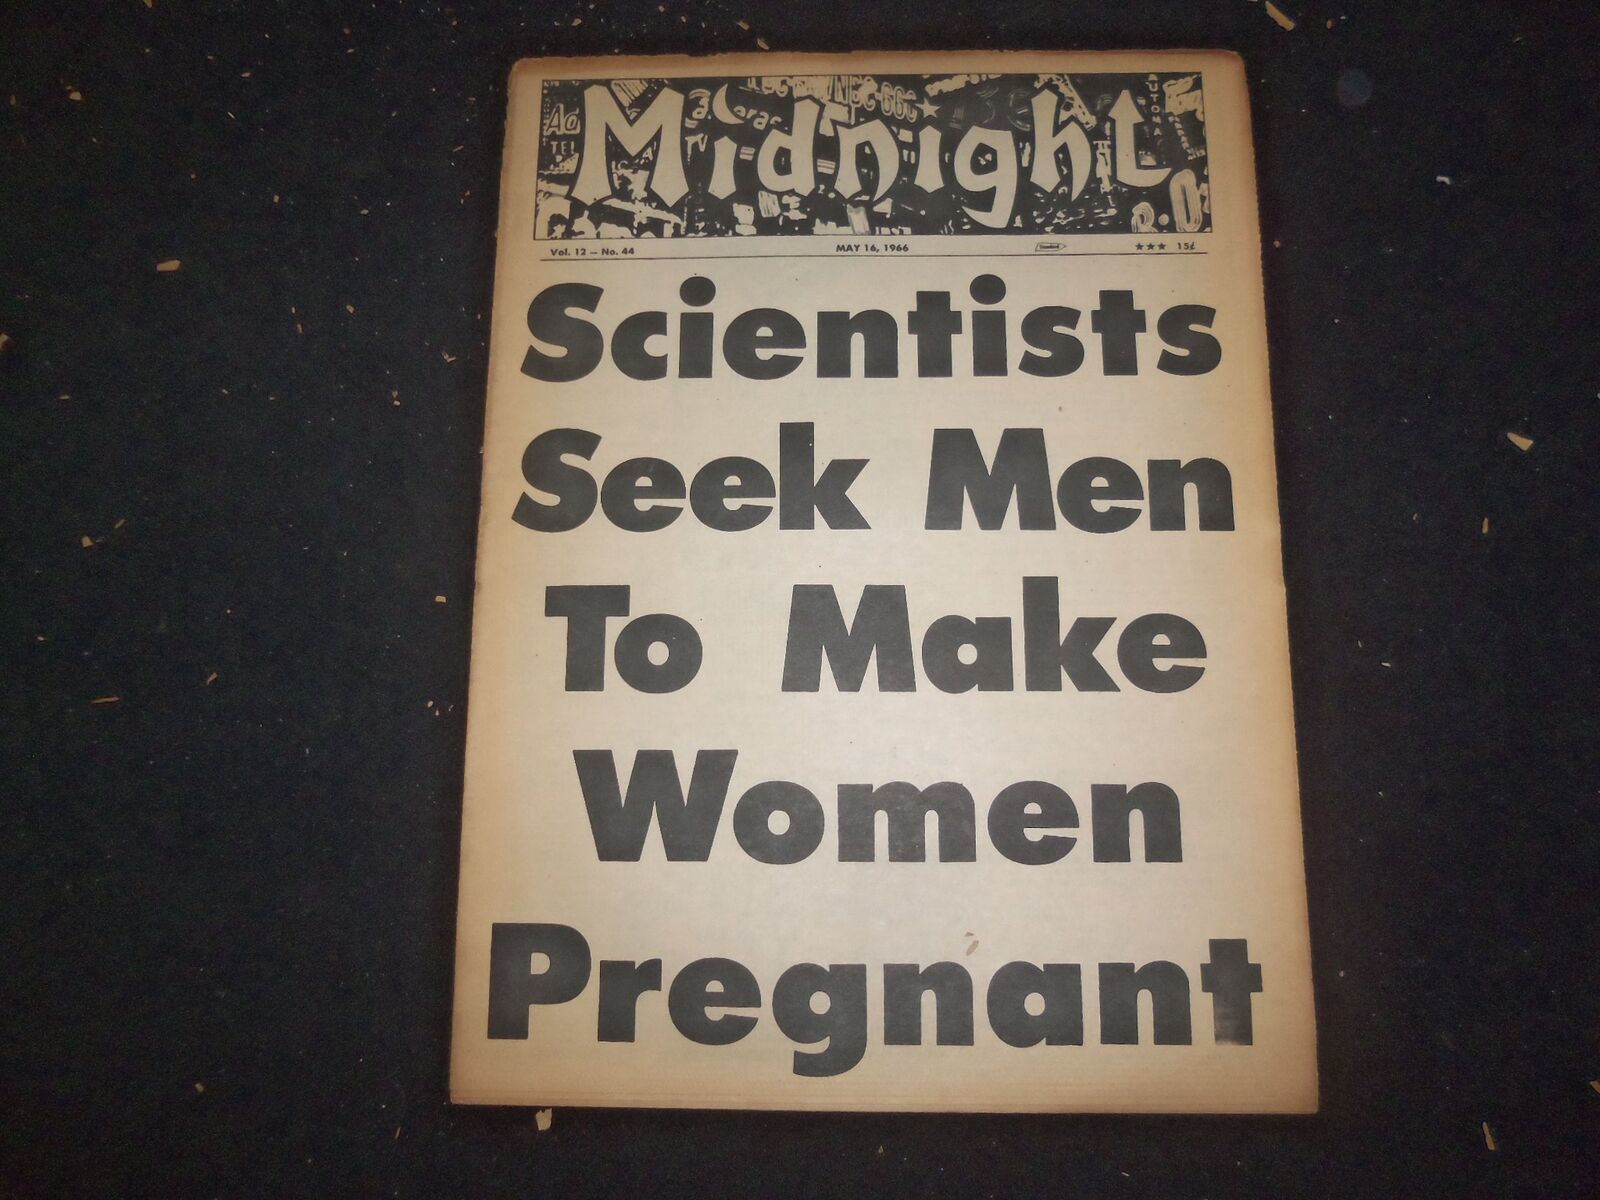 1966 MAY 16 MIDNIGHT NEWSPAPER - SCIENTESTS, MEN TO MAKE WOMEN PREGNANT- NP 7362